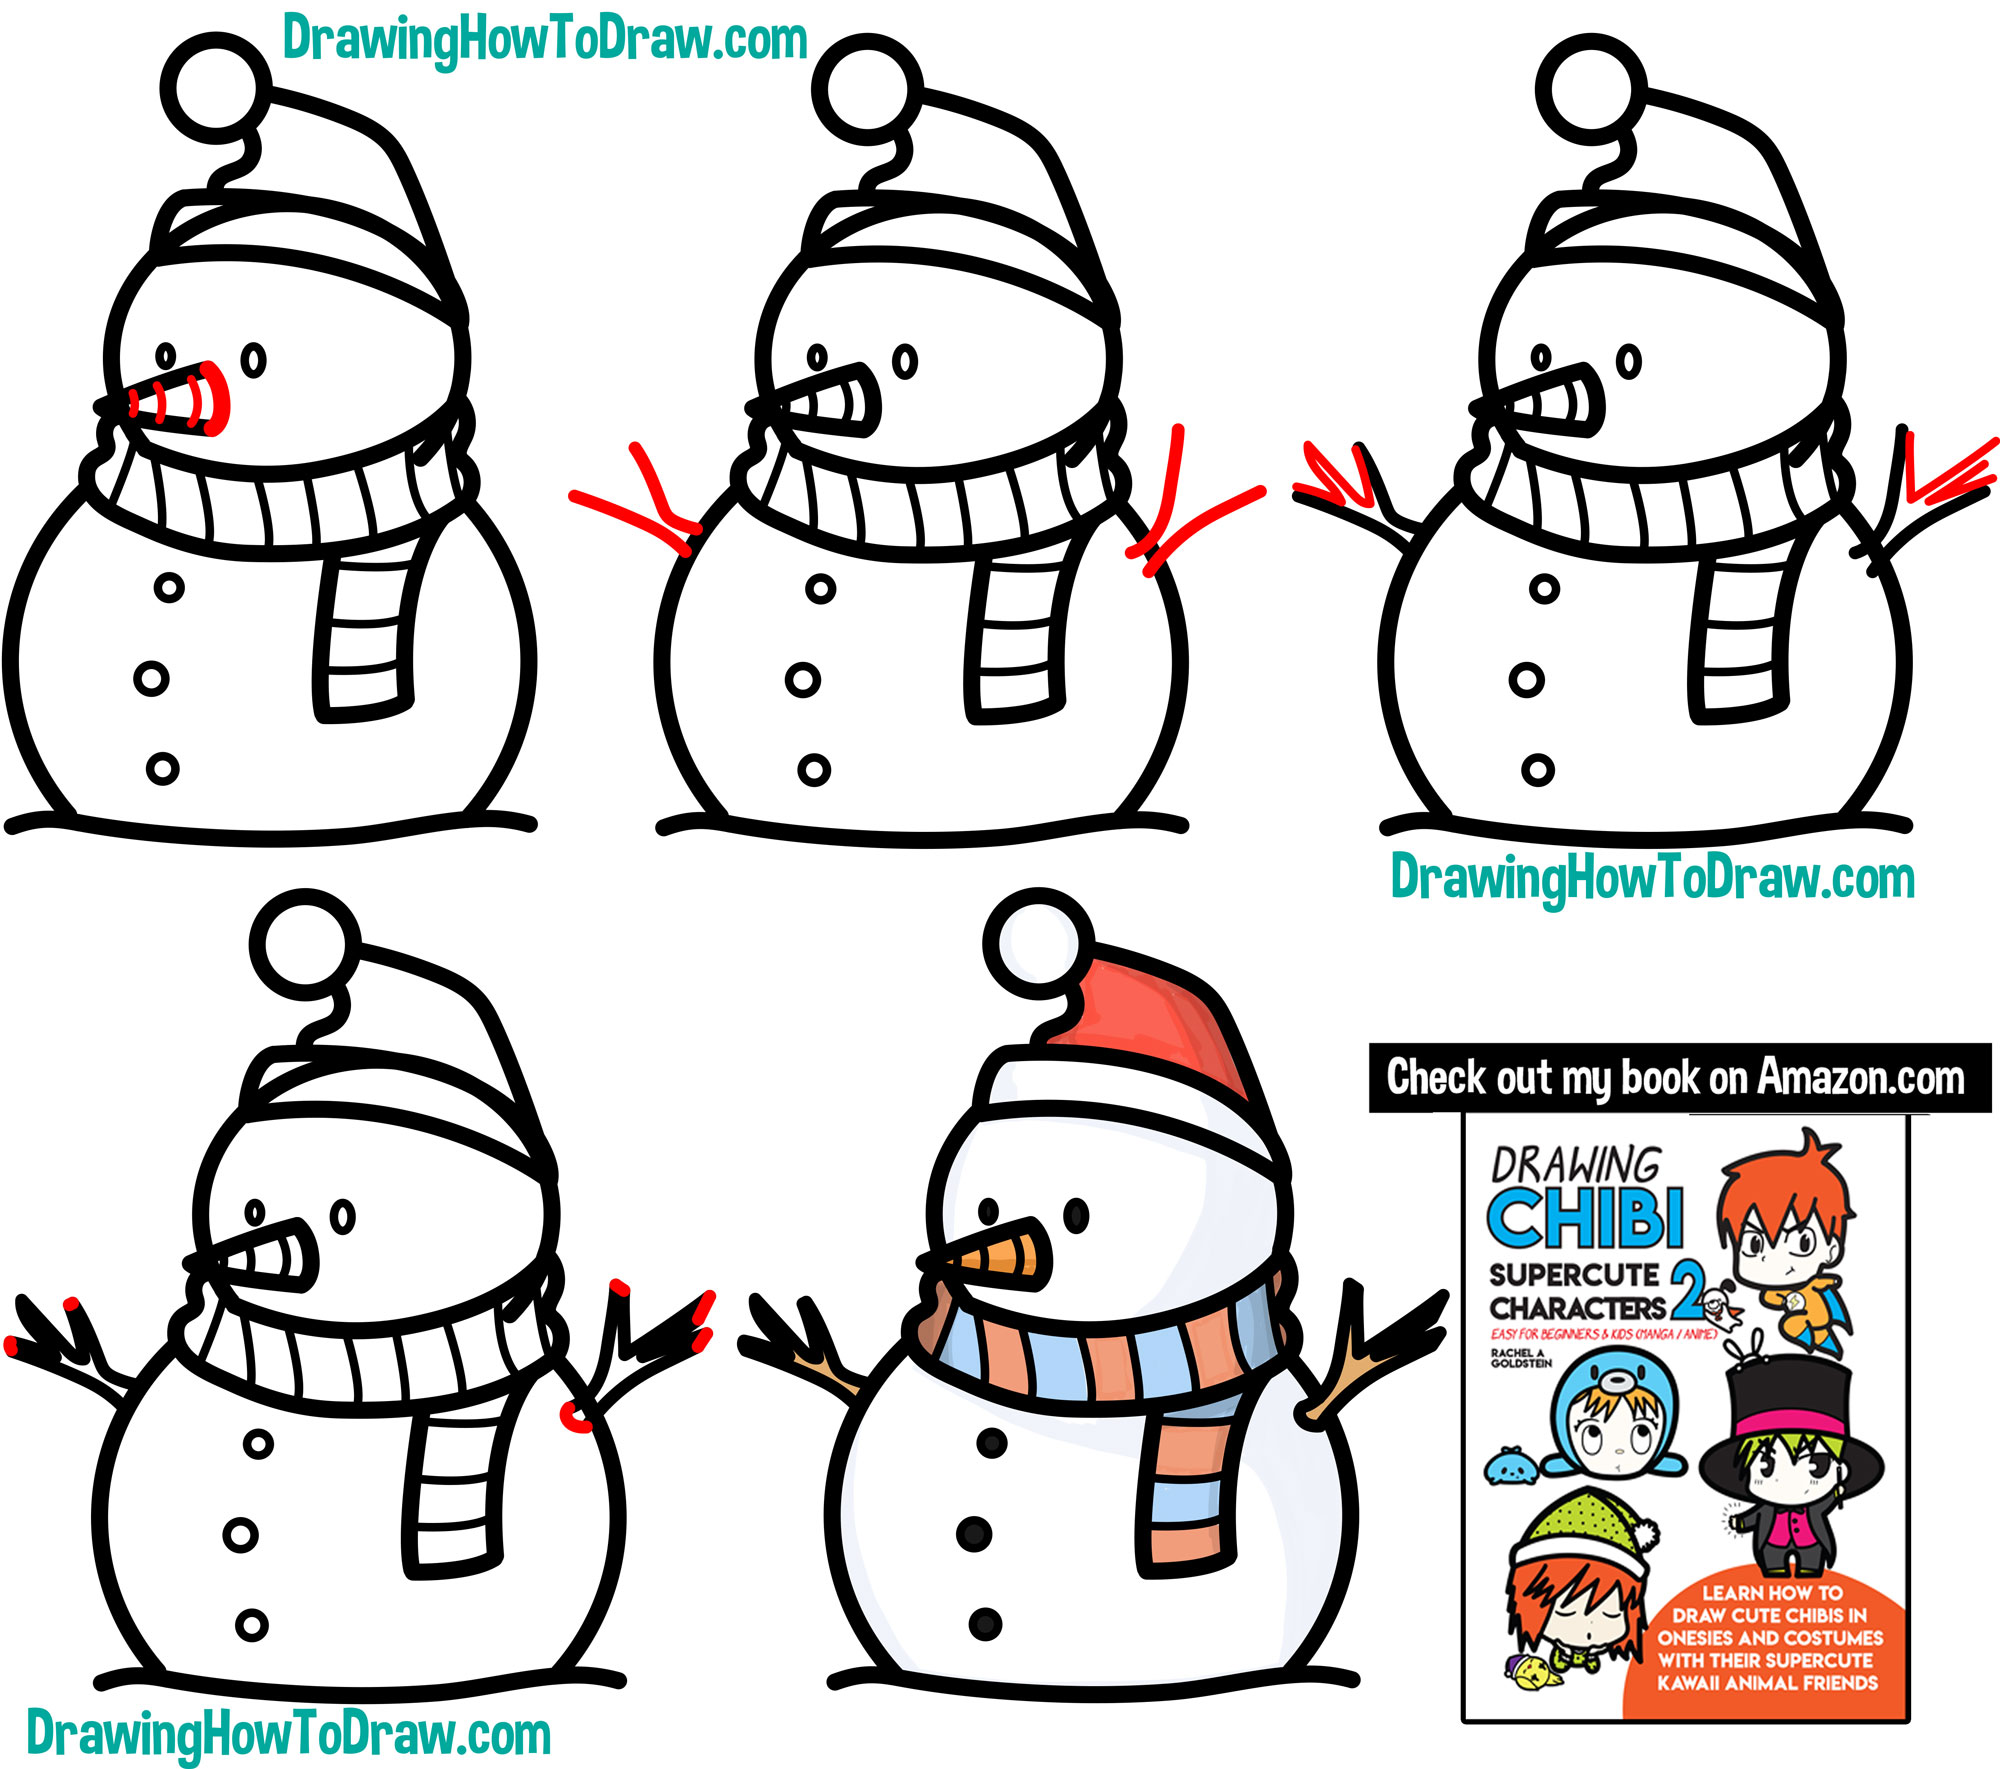 How to Draw a Snowman Easy Step by Step Drawing Tutorial for Kids How